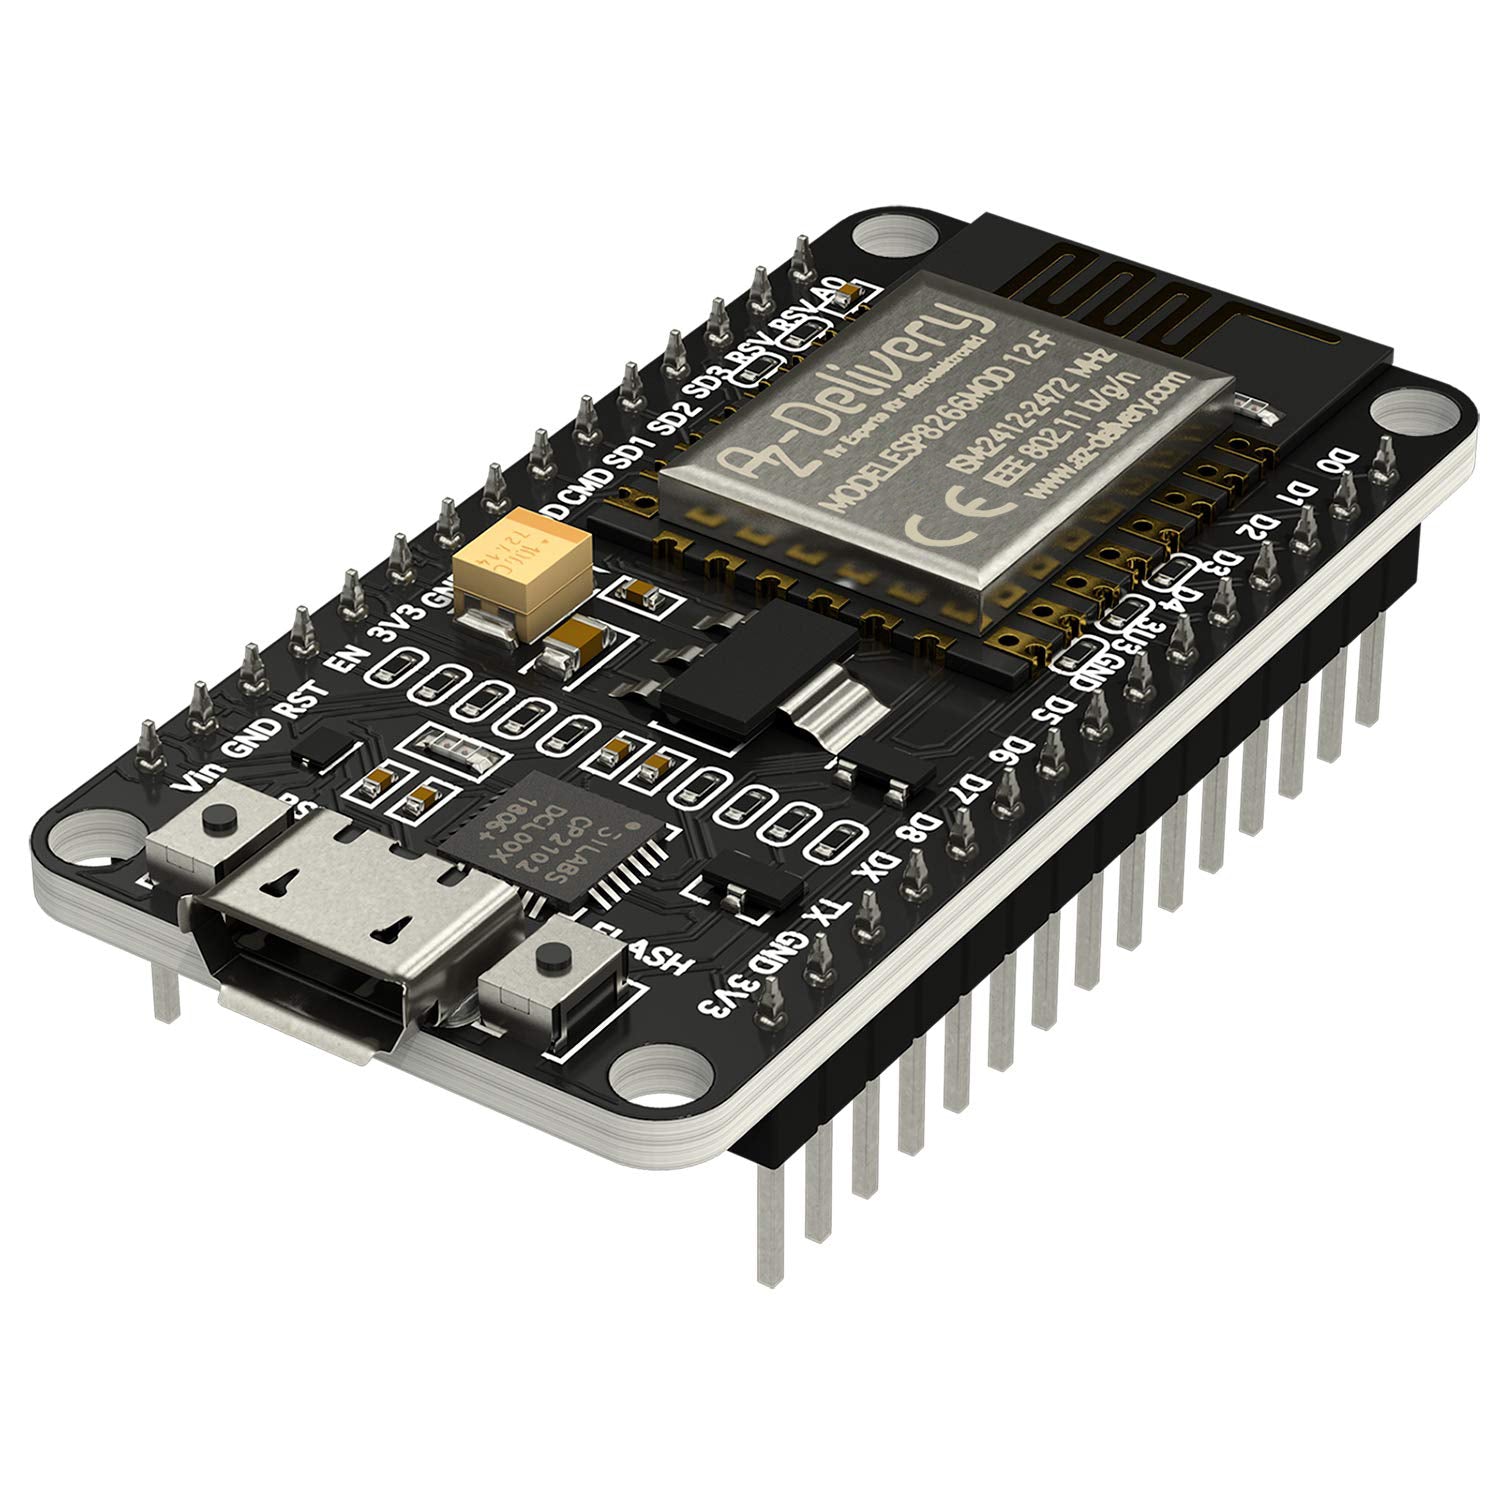 Bundle with two ESP8266 for the blog Christmas greetings via shaking text with ESP32/8266 in MicroPython